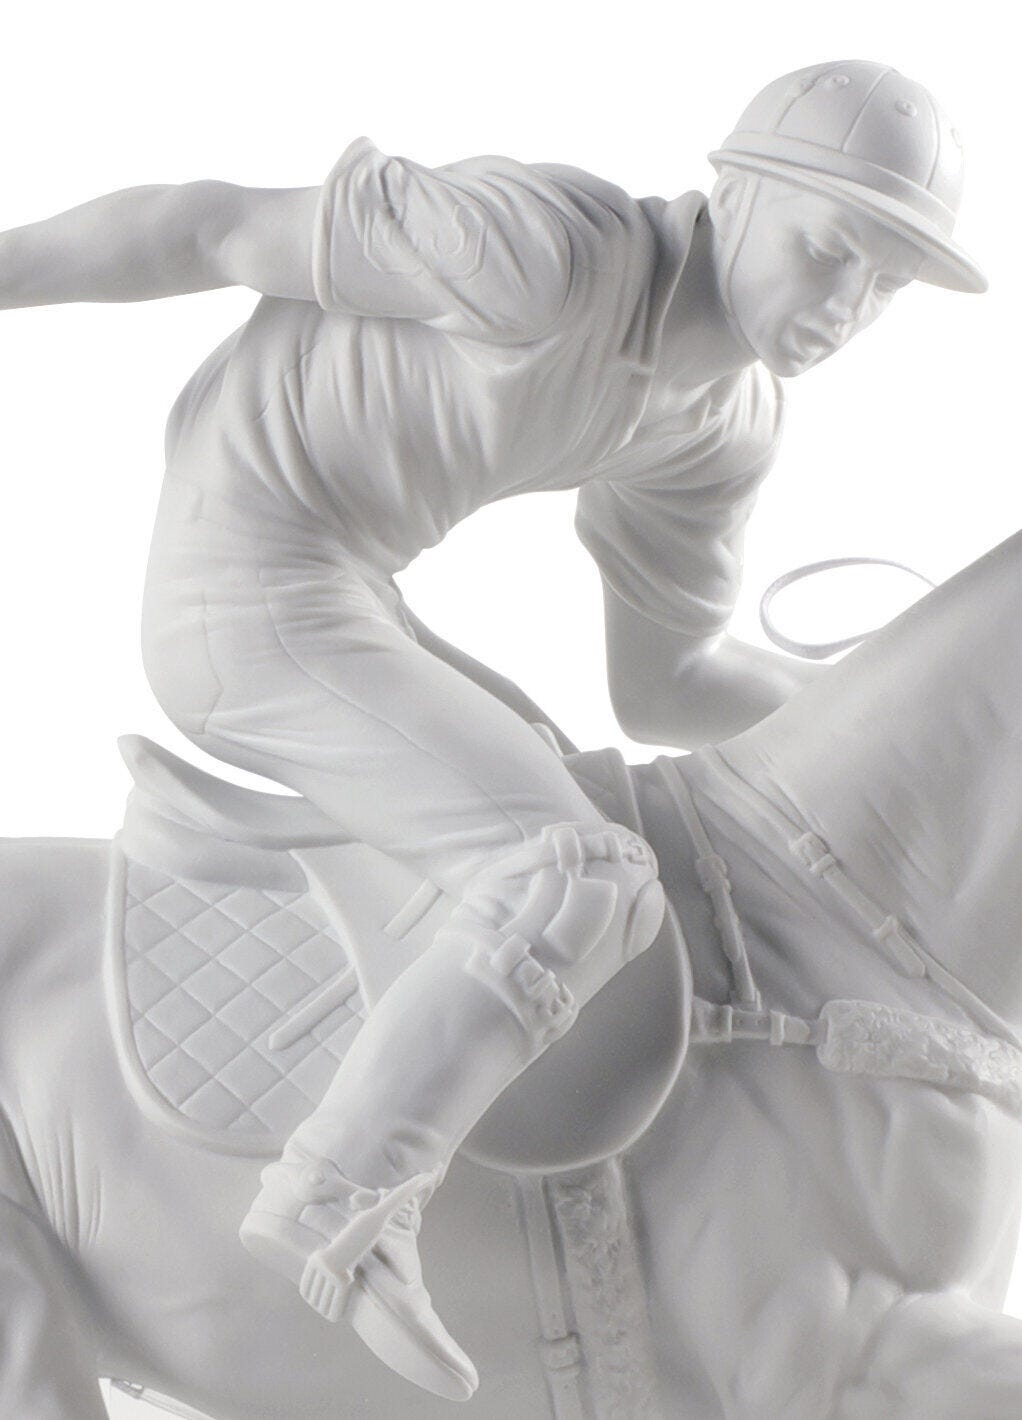 Polo Player Figurine Limited Edition